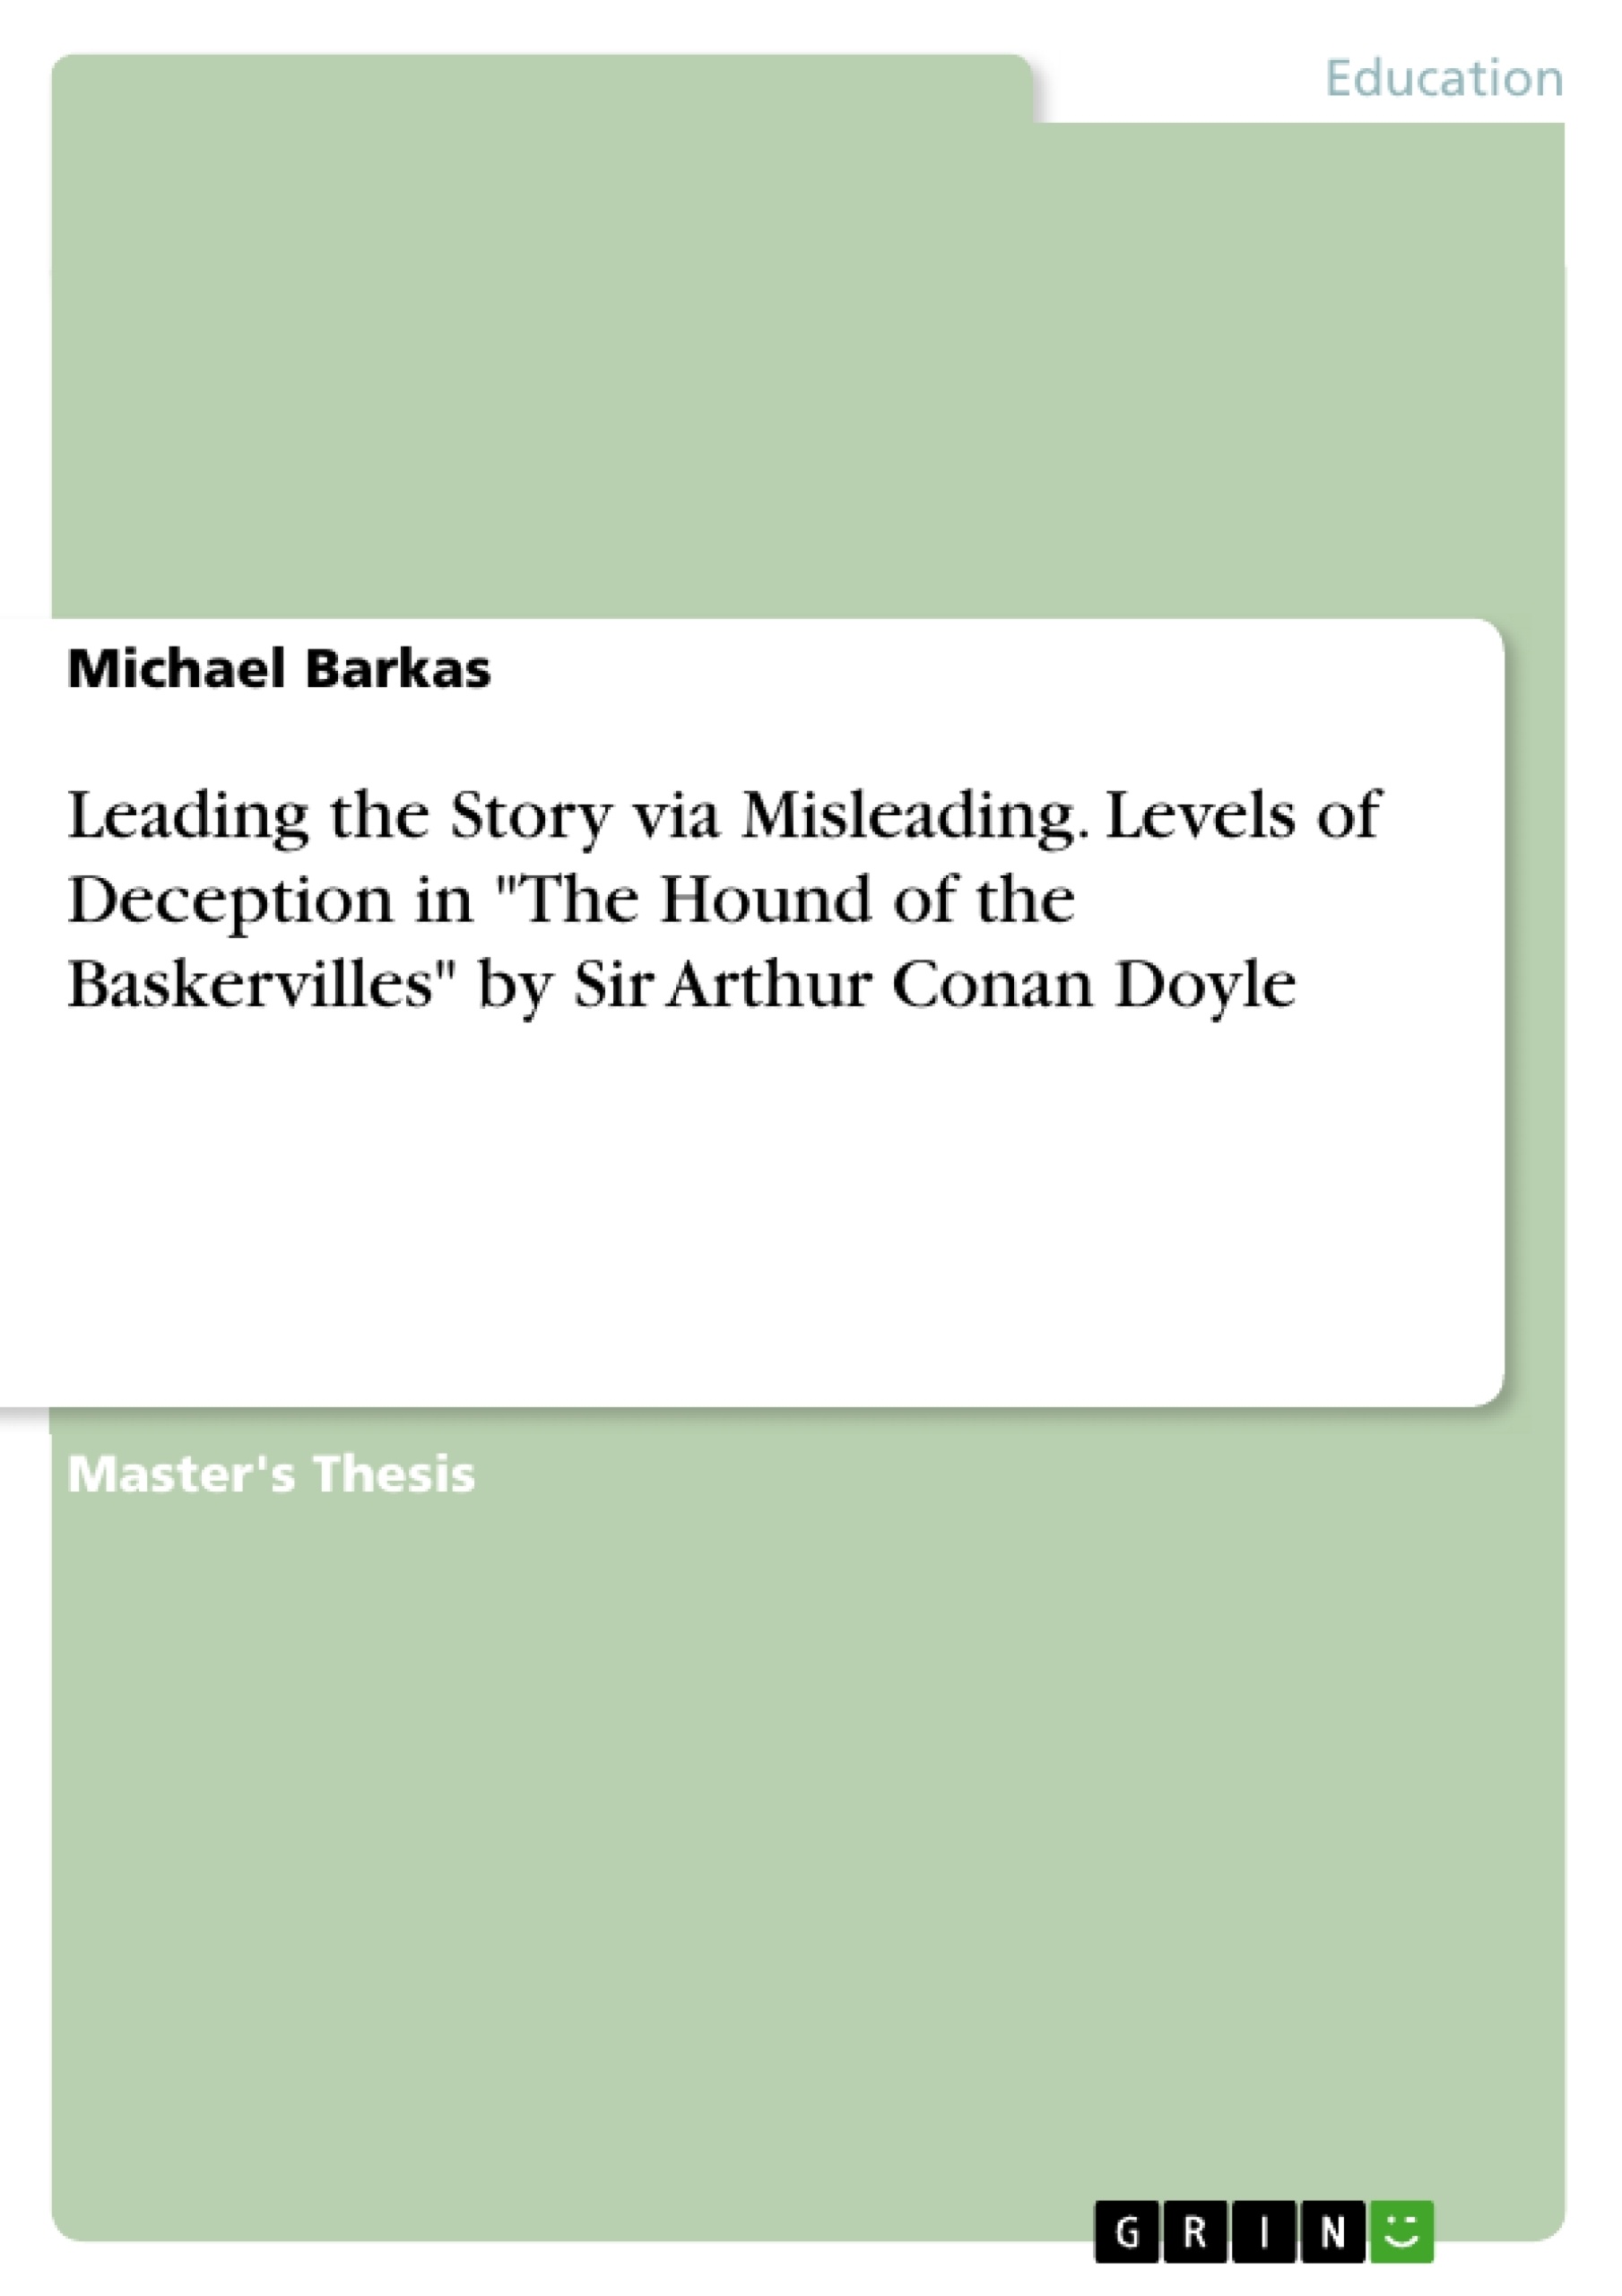 Título: Leading the Story via Misleading. Levels of Deception in "The Hound of the Baskervilles" by Sir Arthur Conan Doyle